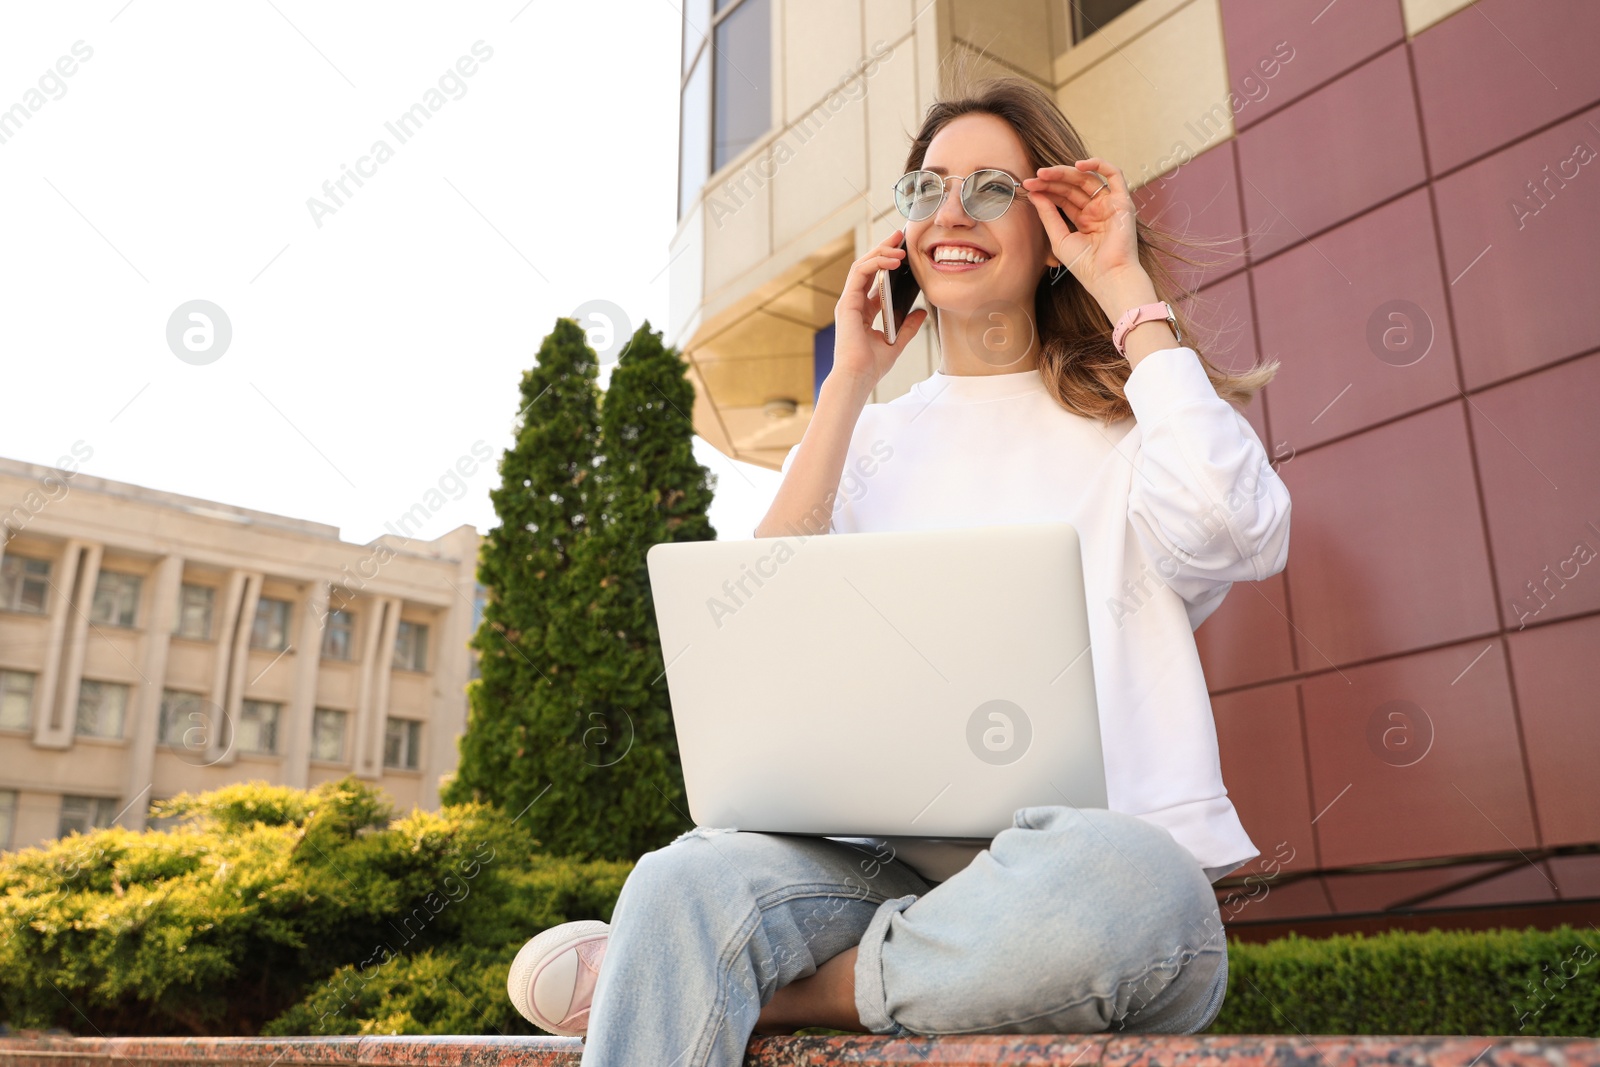 Image of Happy young woman with laptop talking on phone outdoors